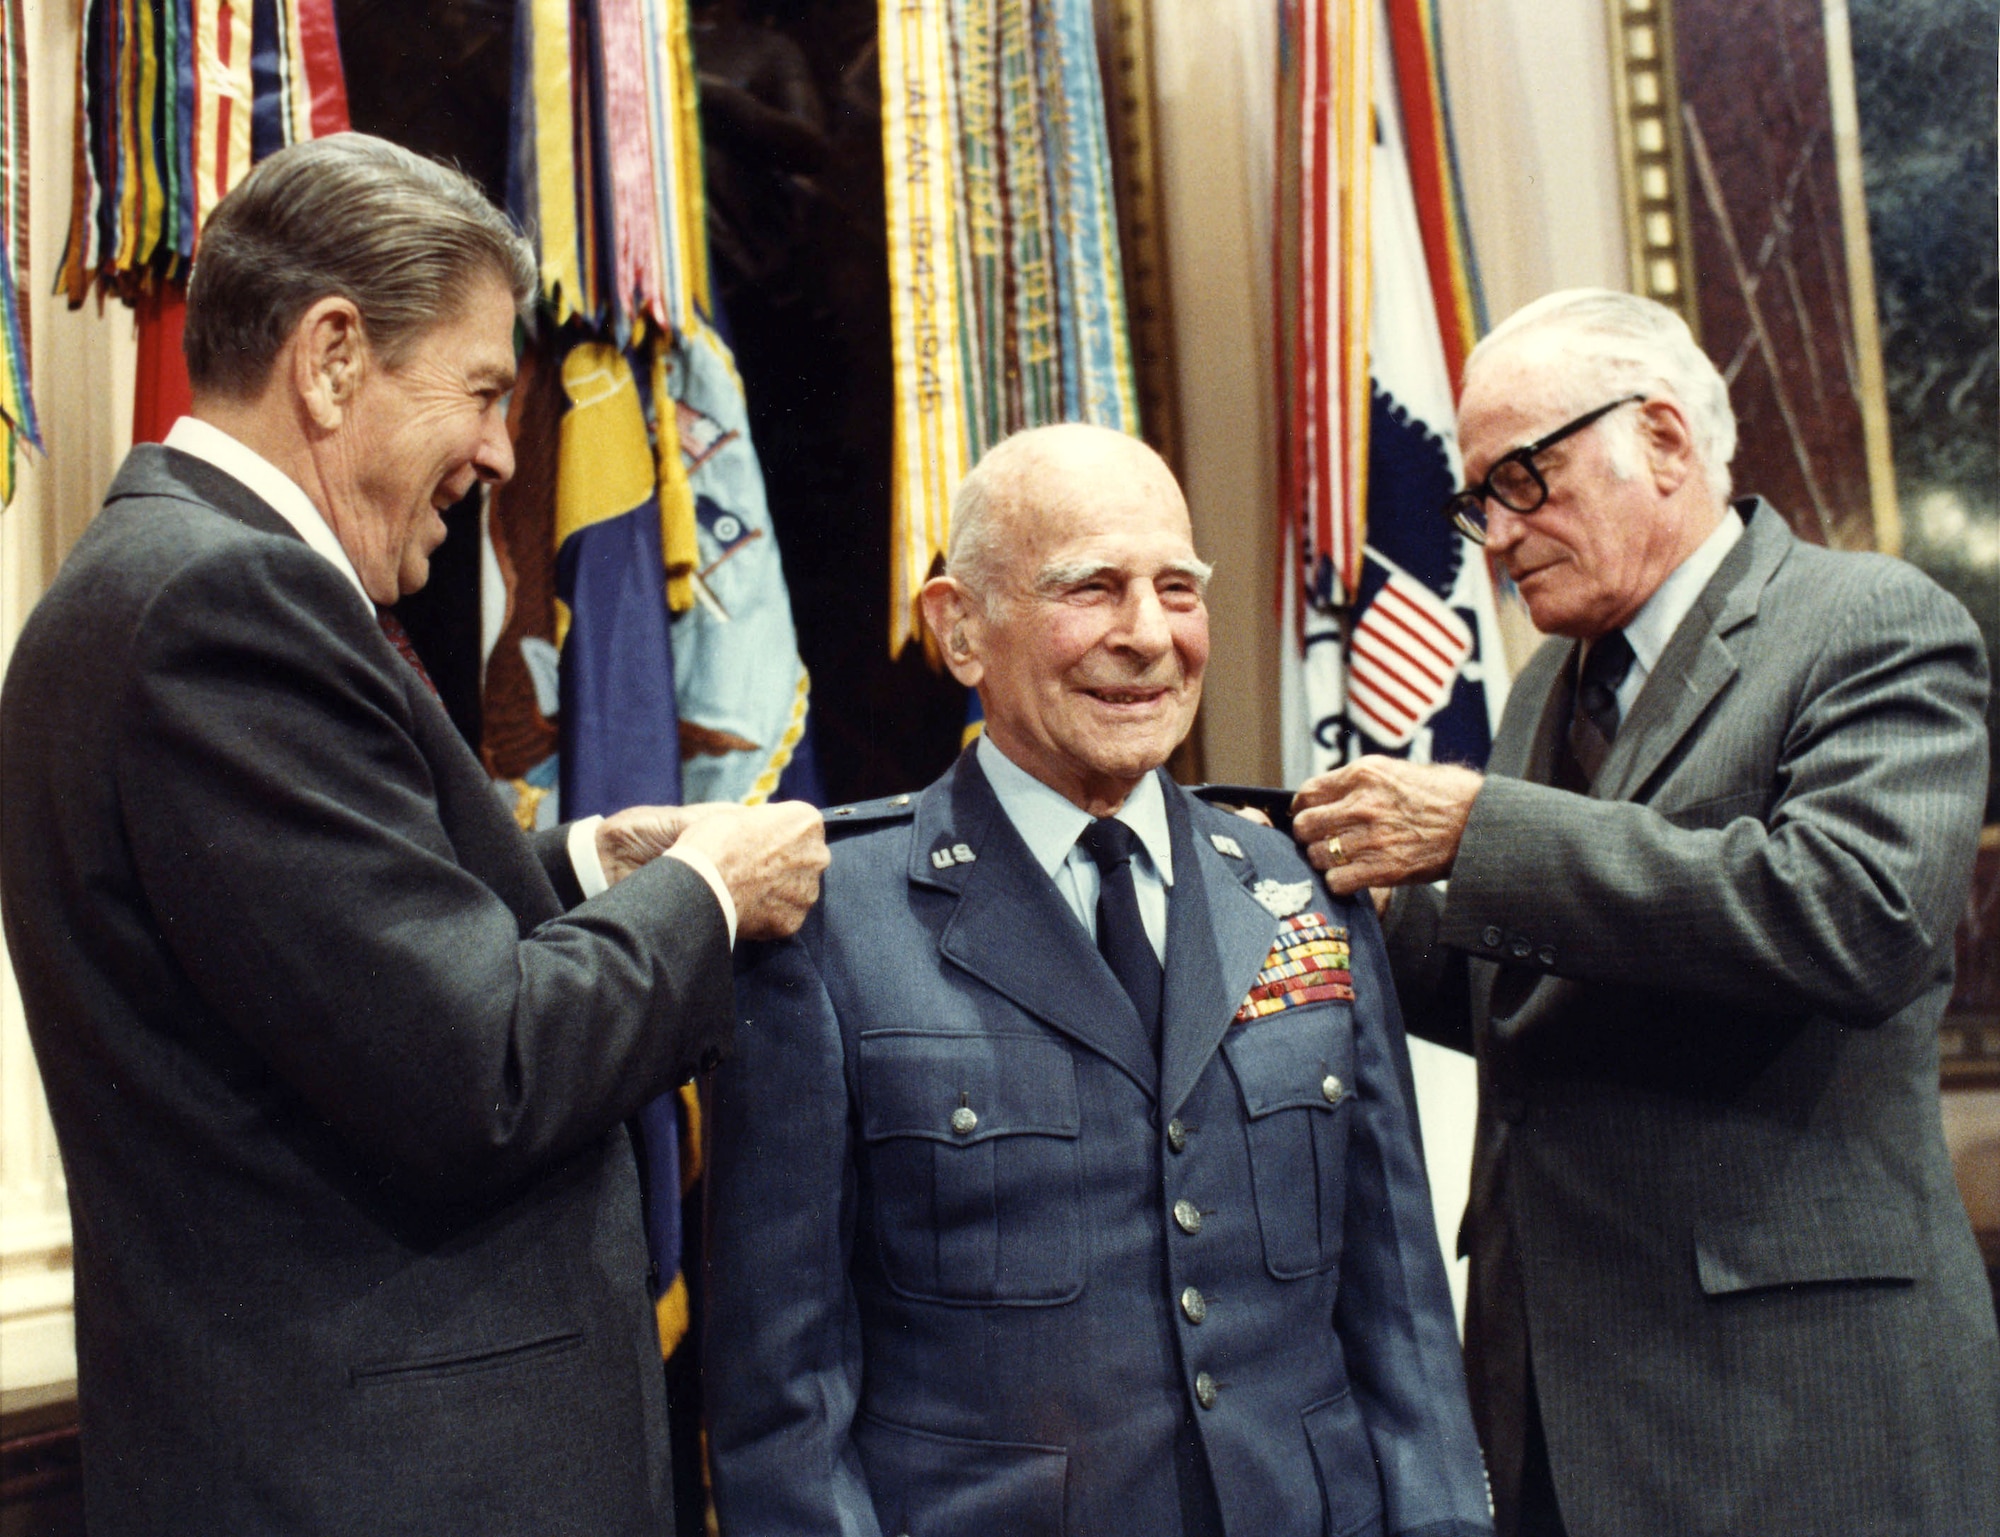 President Ronald Reagan and Senator Barry L. Goldwater pin the fourth star on Gen. James Doolittle April 10, 1985, 26 years after his retirement from the U.S. Air Force. General Doolittle was advanced to four-star rank by Senate confirmation, making him the first person in Air Force Reserve history to wear four stars.  (White House photo by Bill Fitz-Patrick)